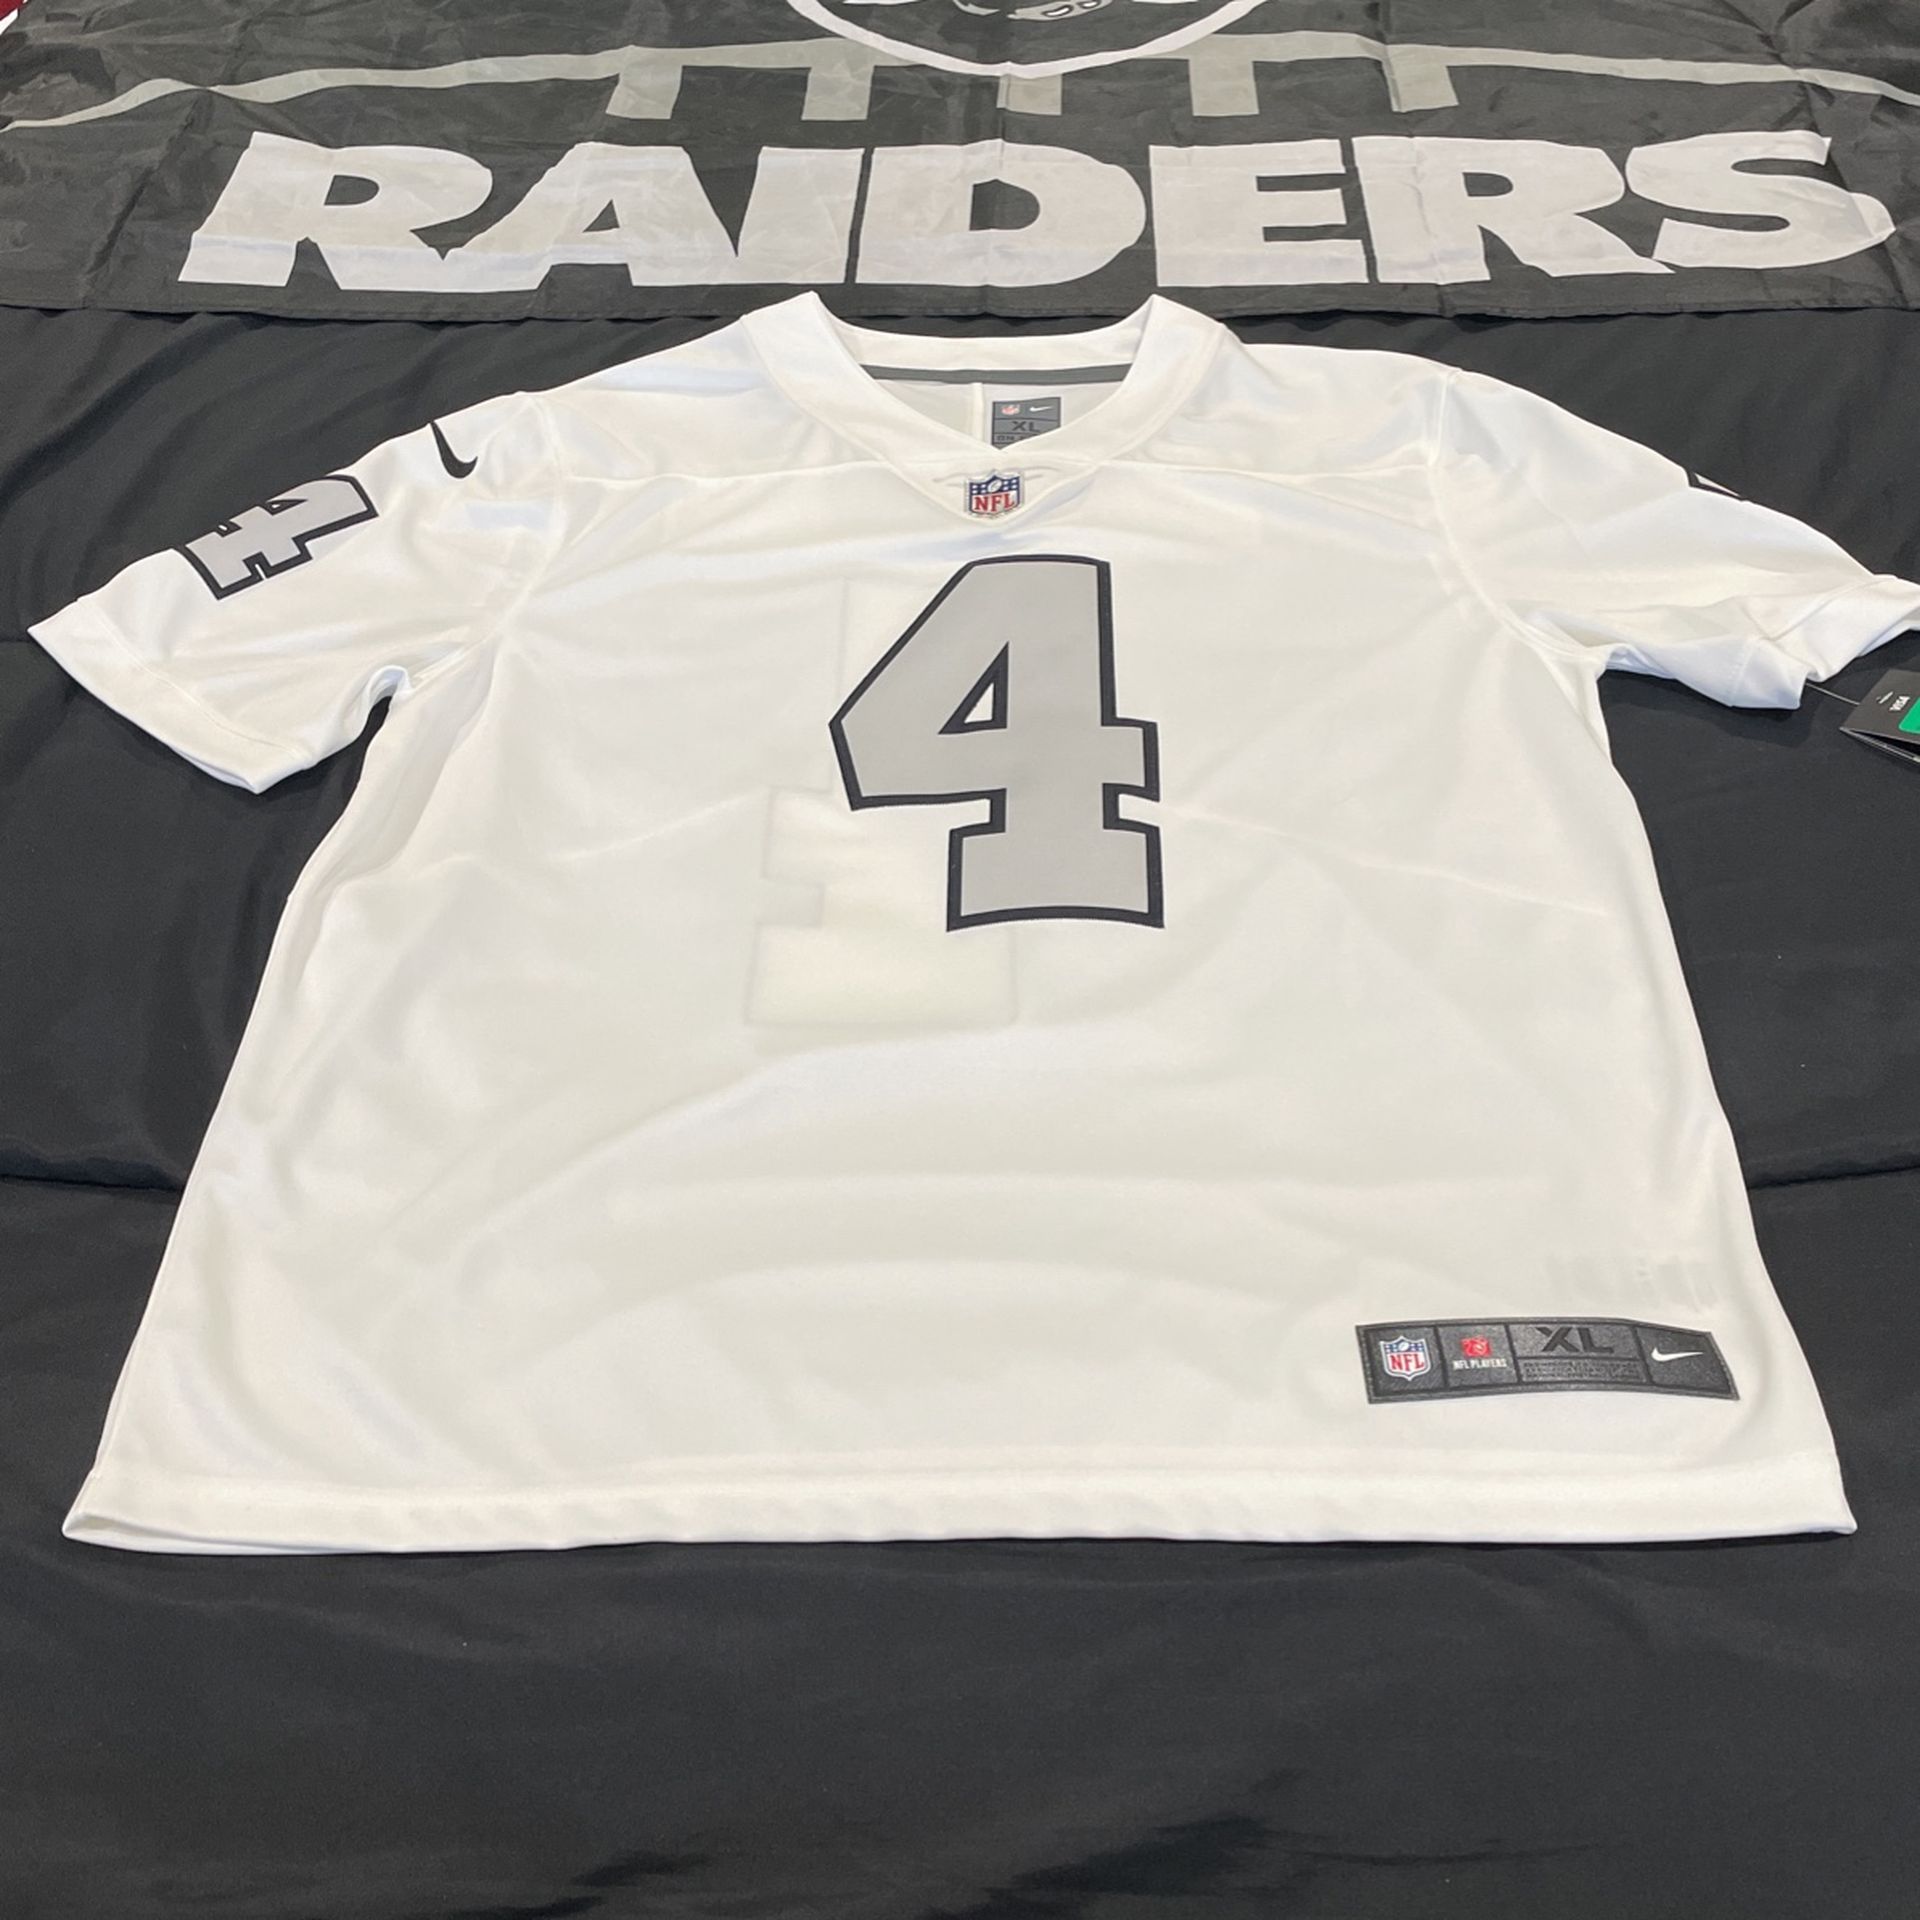 Raiders jersey for Sale in Phillips Ranch, CA - OfferUp